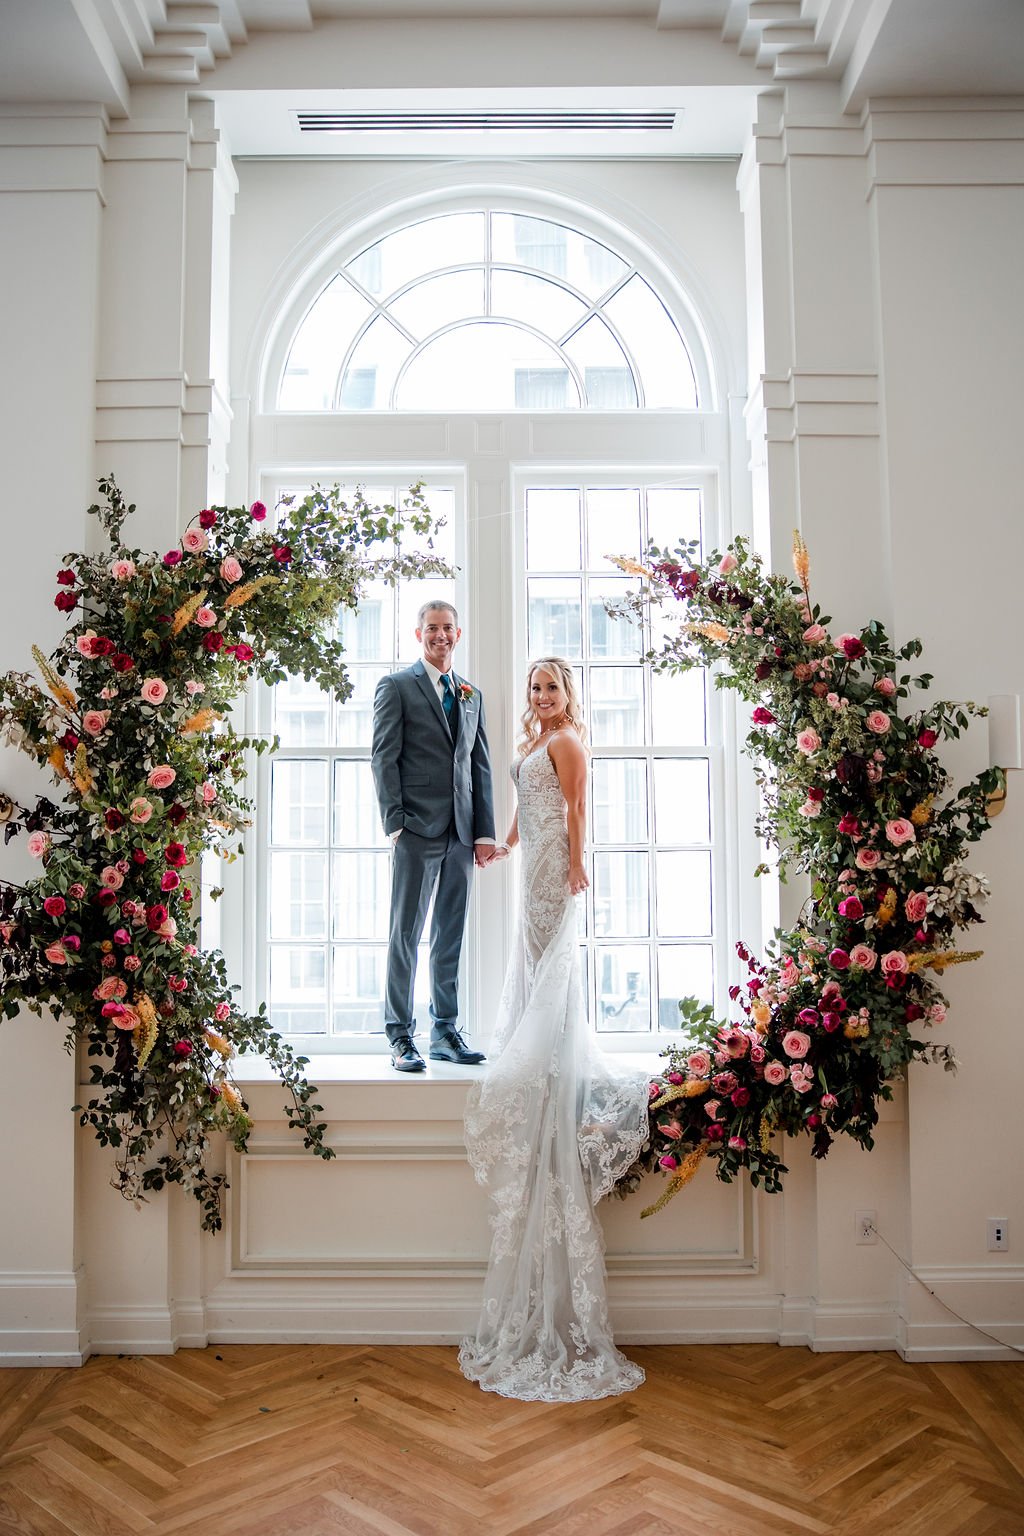 Organic circular floral installation with jewel tone florals featuring garden roses and lush greenery. Nashville wedding floral design at Hotel Noelle.